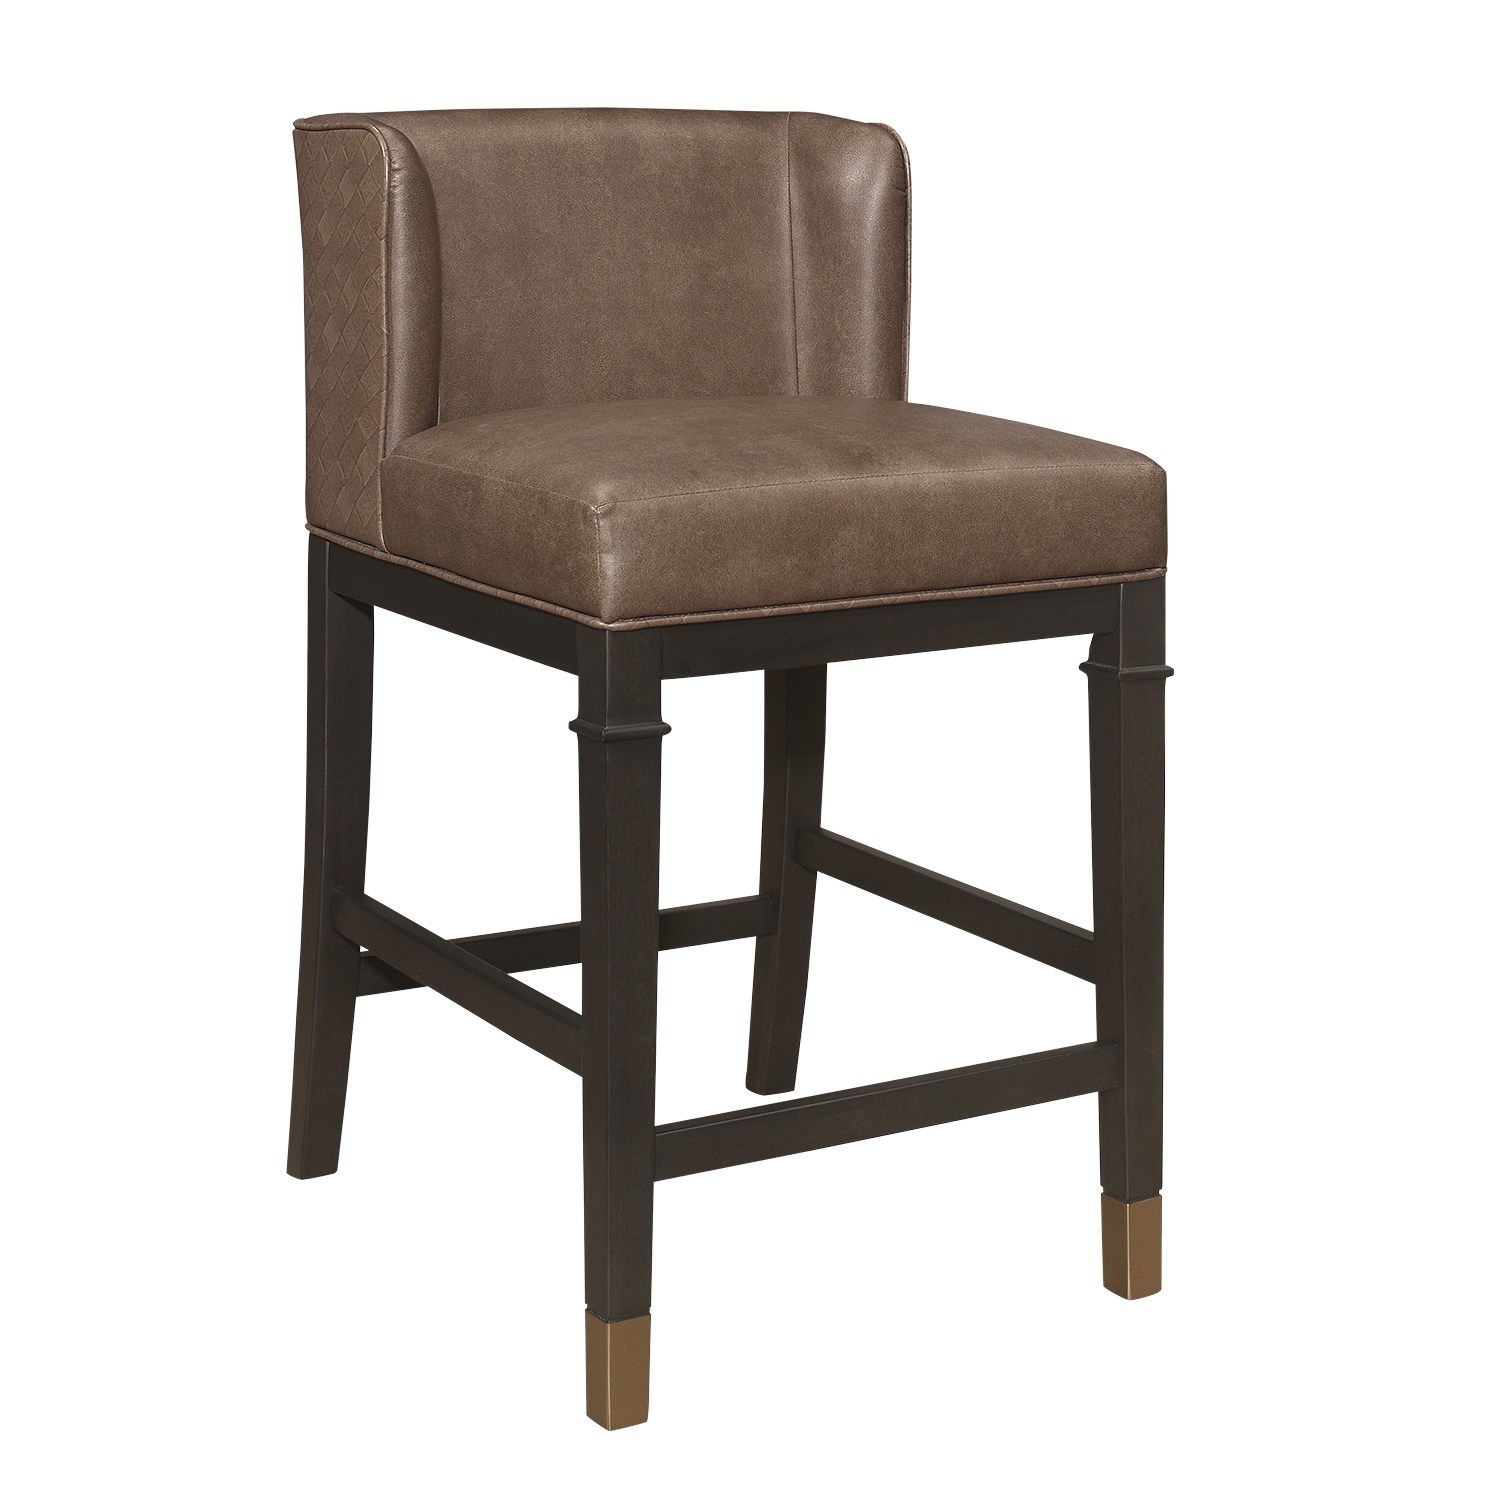 Hillsdale Hotchner Wing Back Upholstered Wood Counter Height Stool - Cafe Faux Leather